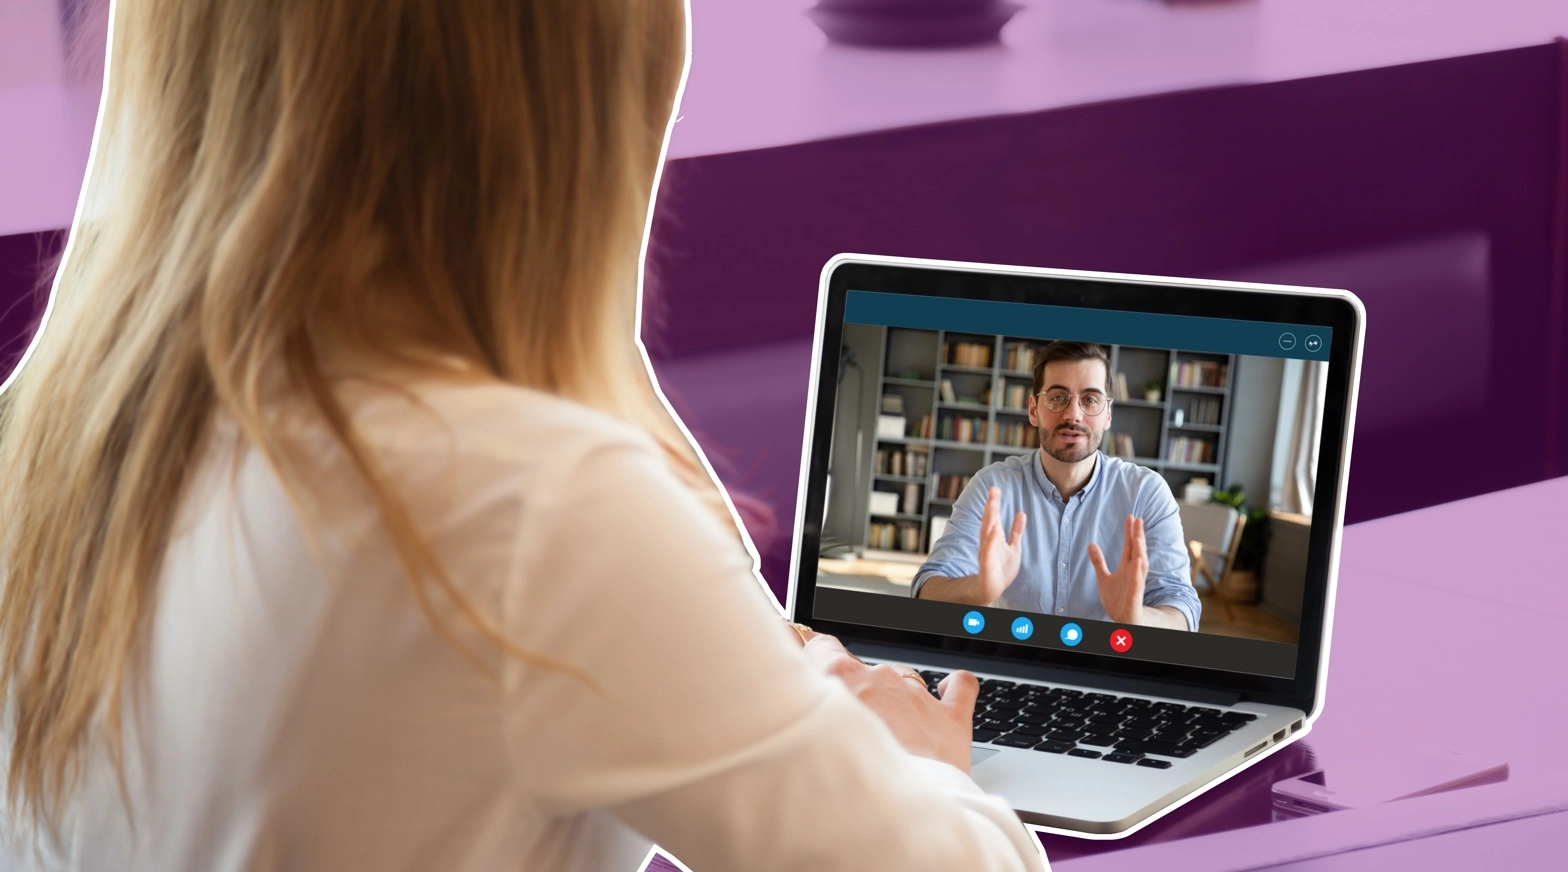 5 Tips for Handling Difficult Conversations on Zoom (Or Any Video Call)